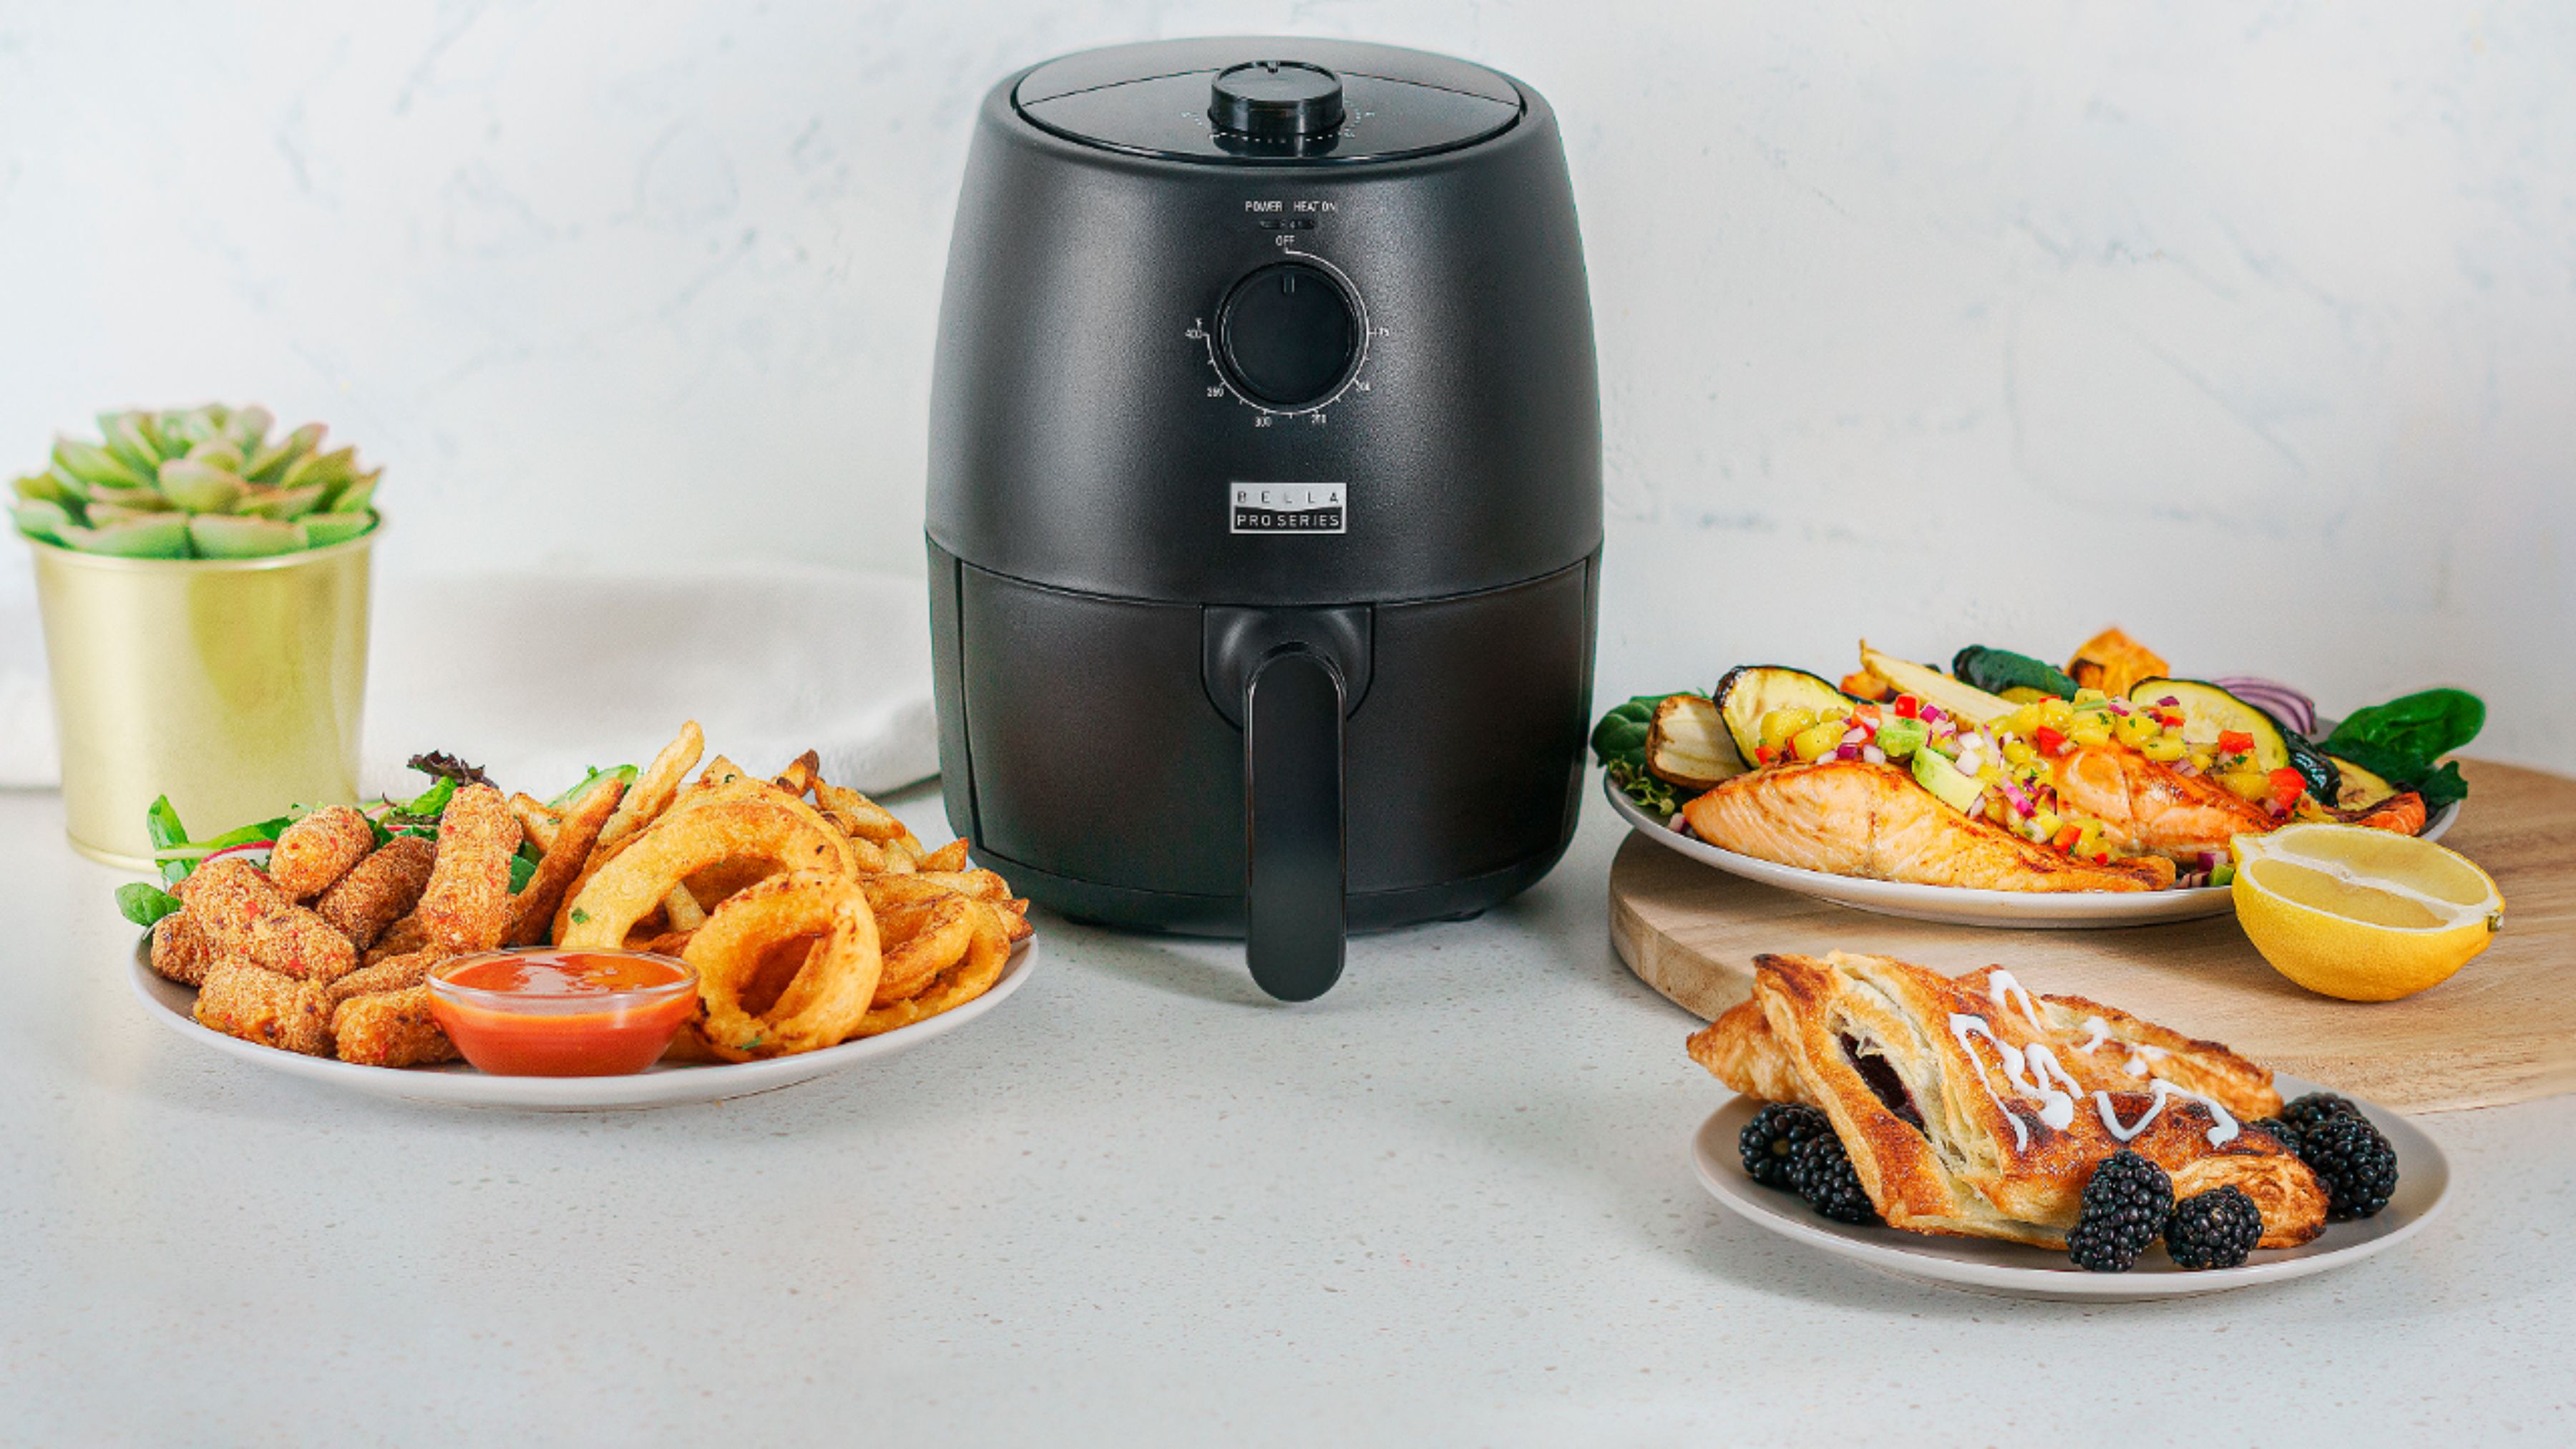 Dragonball 2 qt Air Fryer, Small Air Fryer for Convenience, Retro Design, Nonstick, Dishwasher-Safe Basket, White Air Fryer with Adjustable